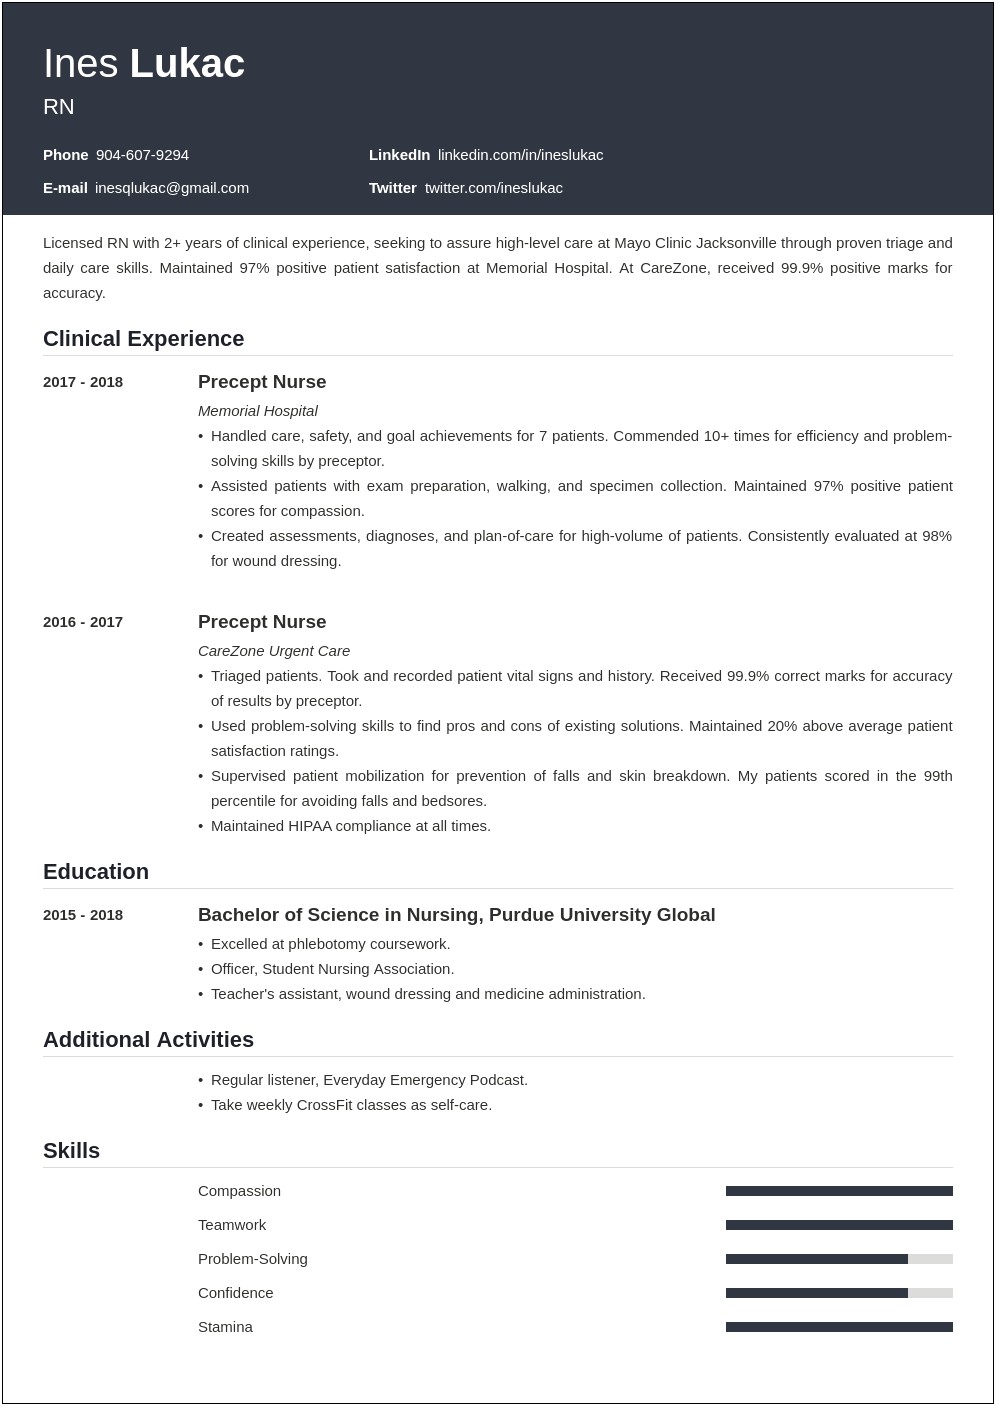 Resume For A Nurse With No Experience